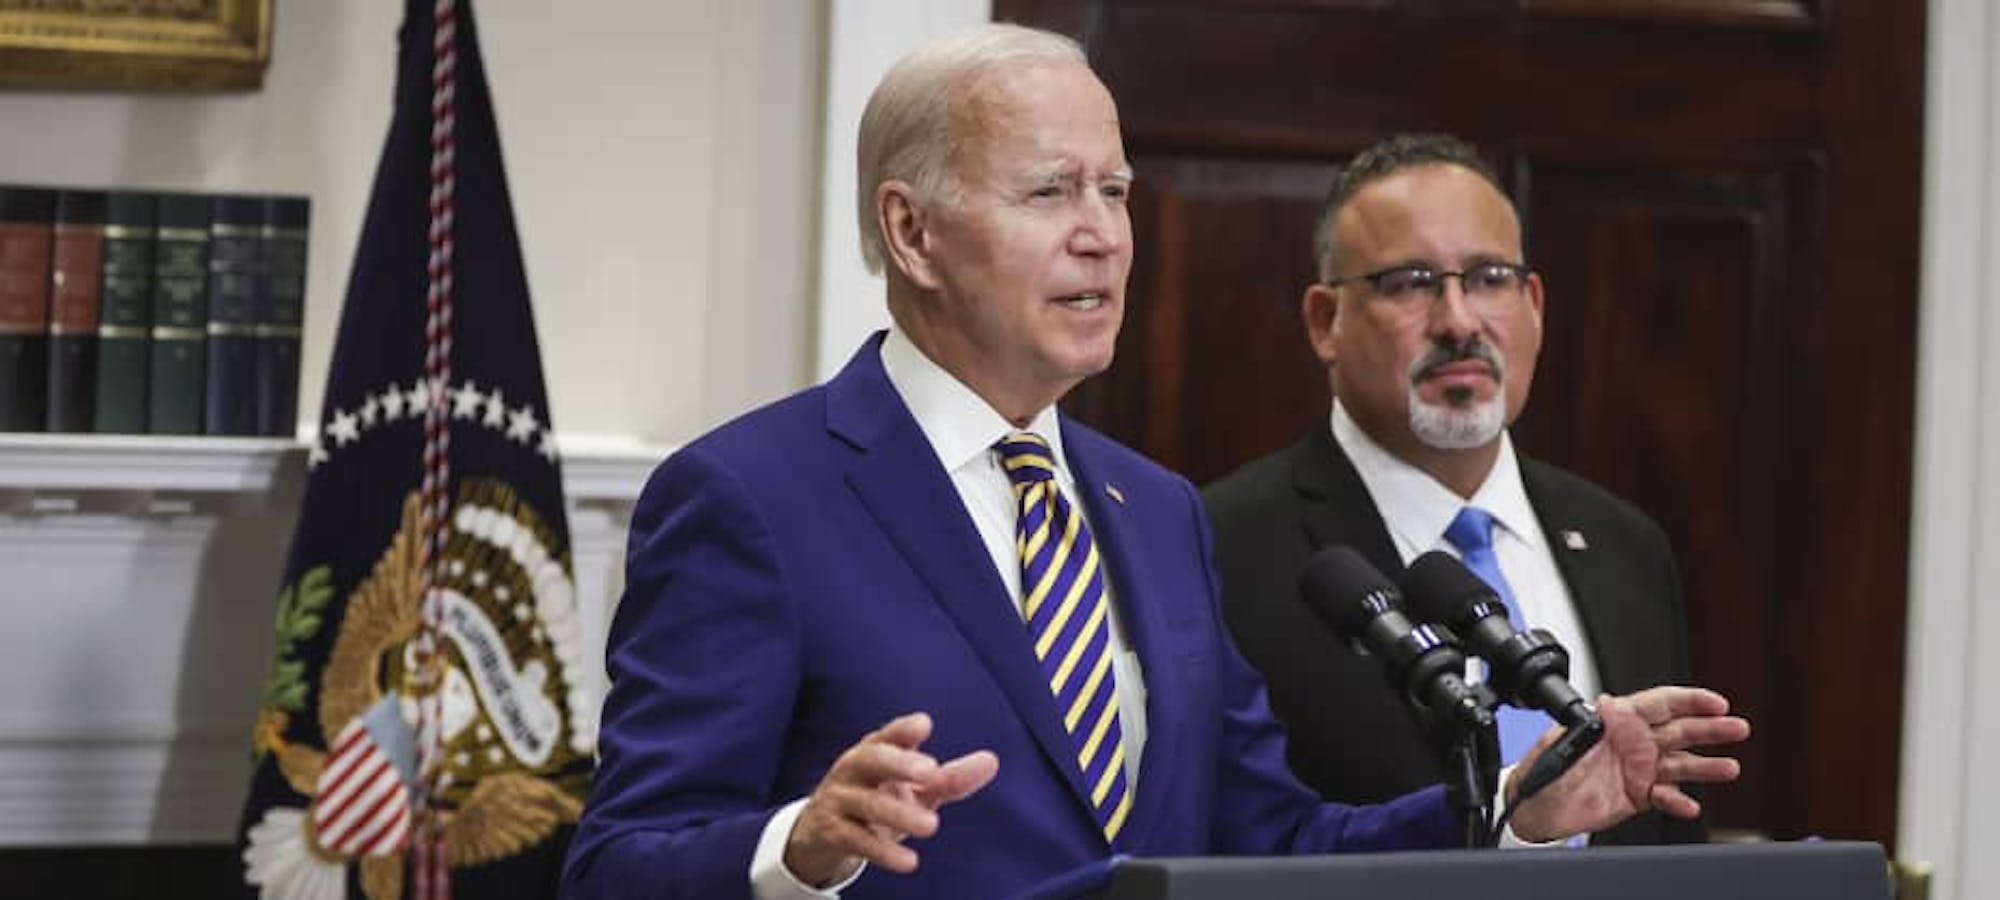 Biden's student loan plan and how this affects student loan forgiveness.